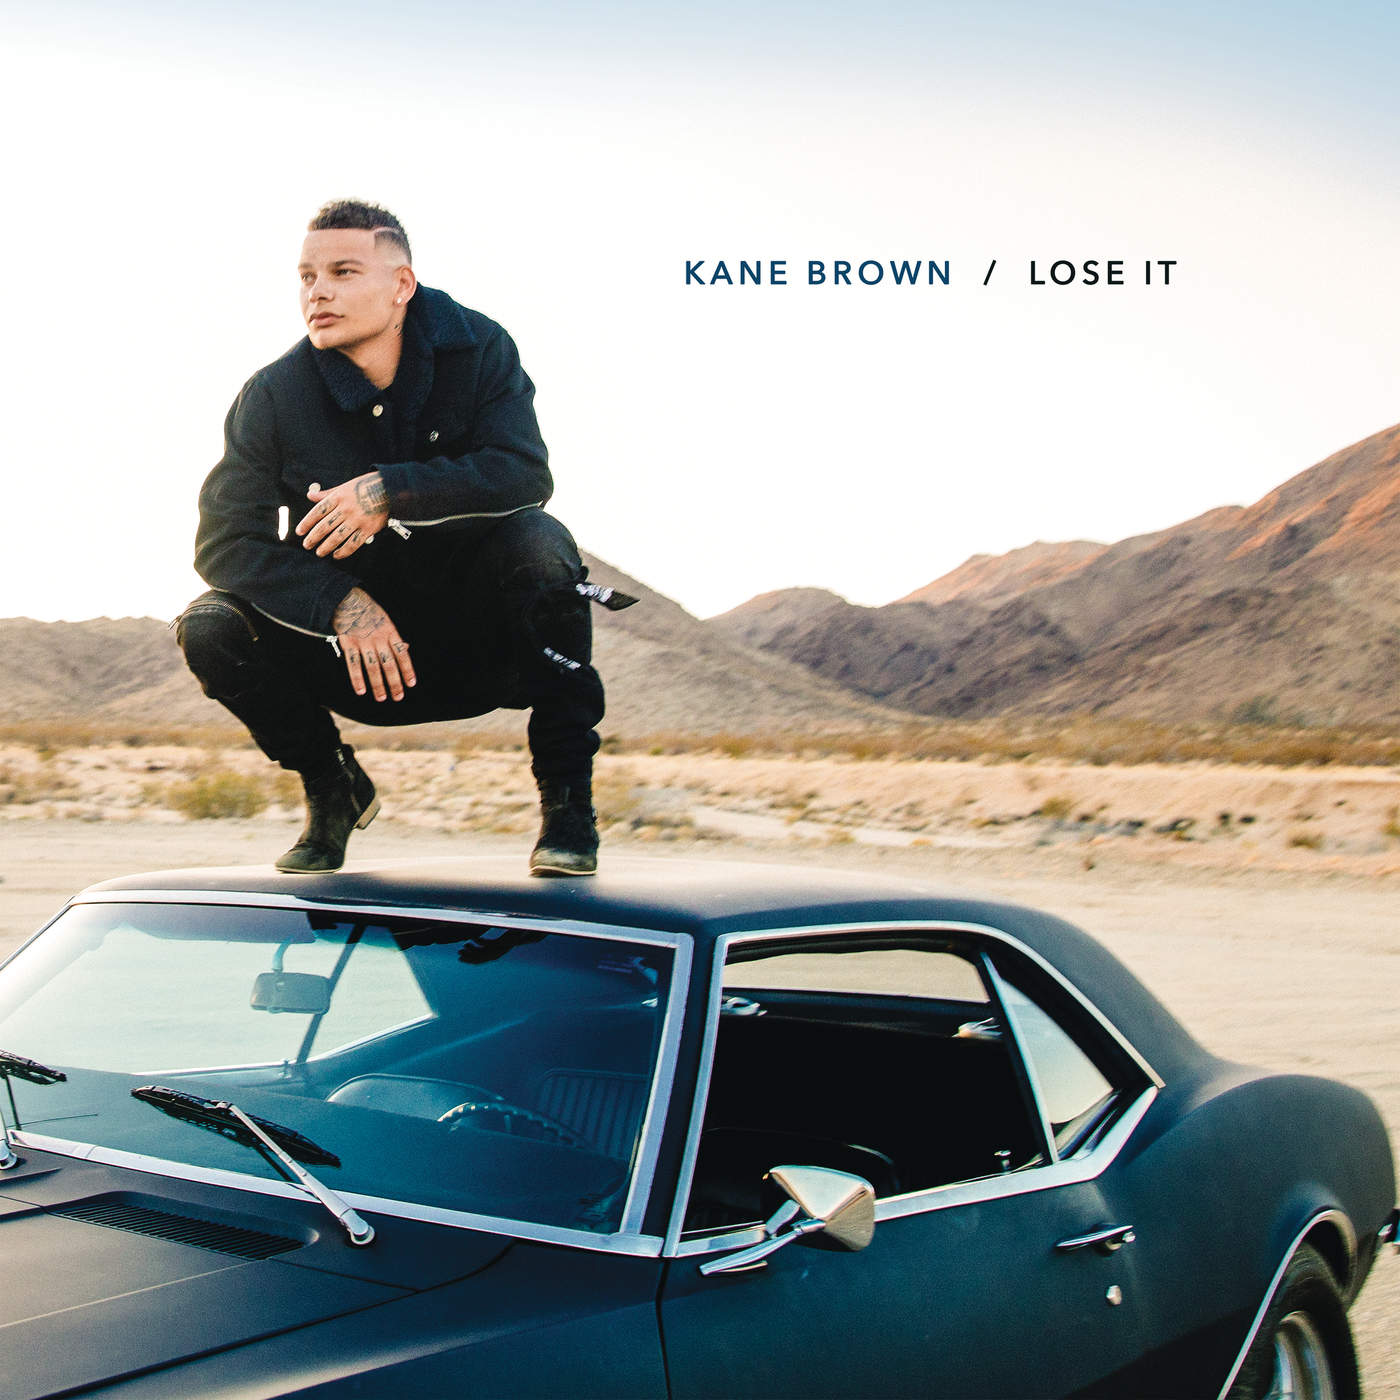 Art for Lose It by Kane Brown